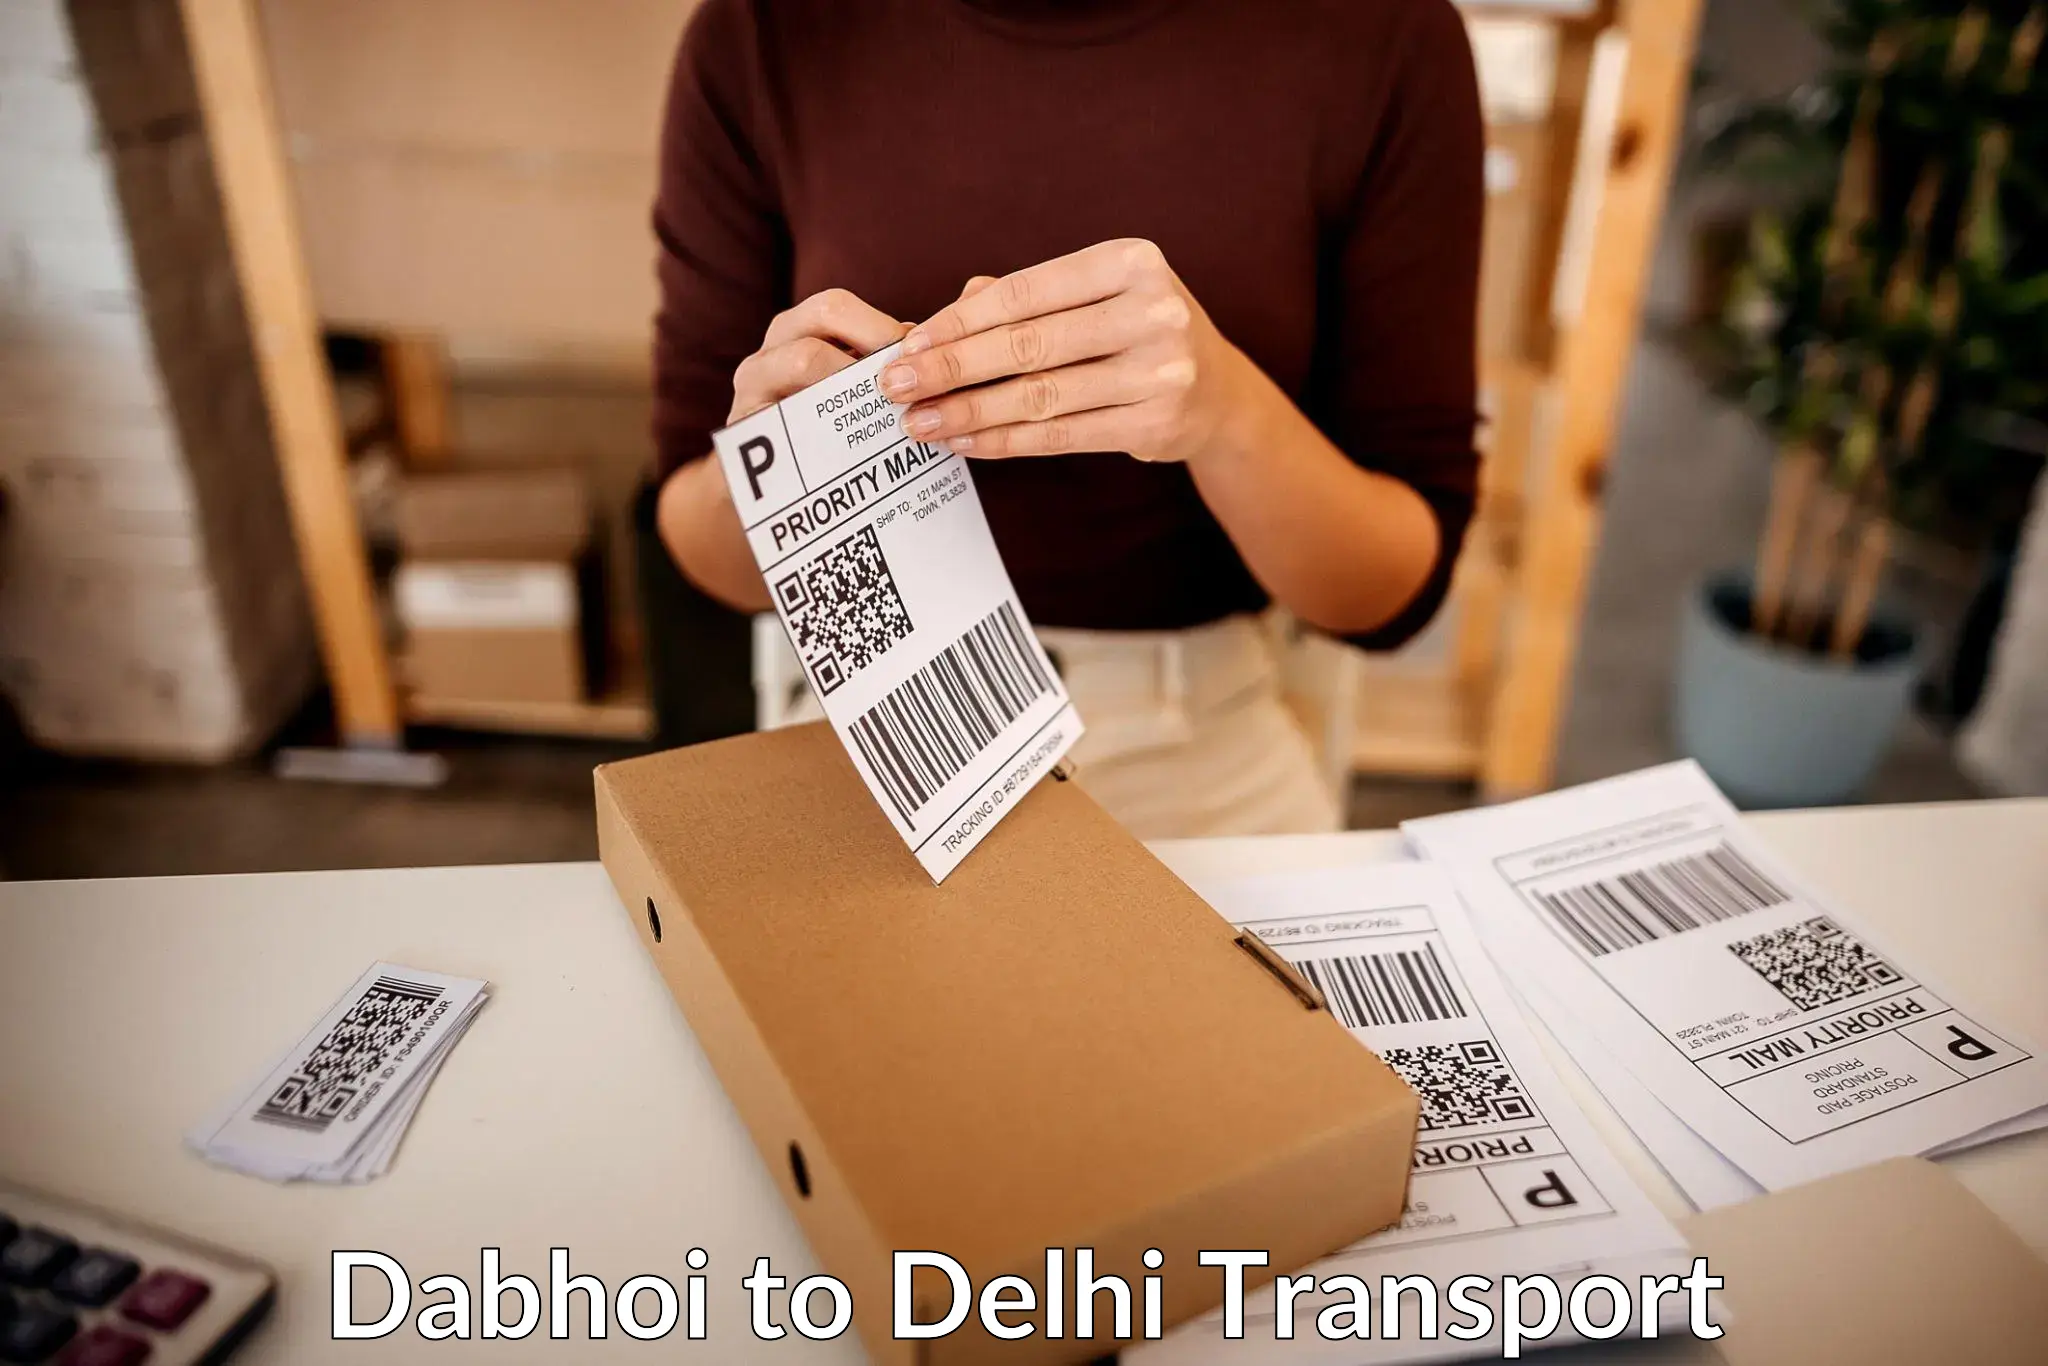 Goods delivery service Dabhoi to NCR